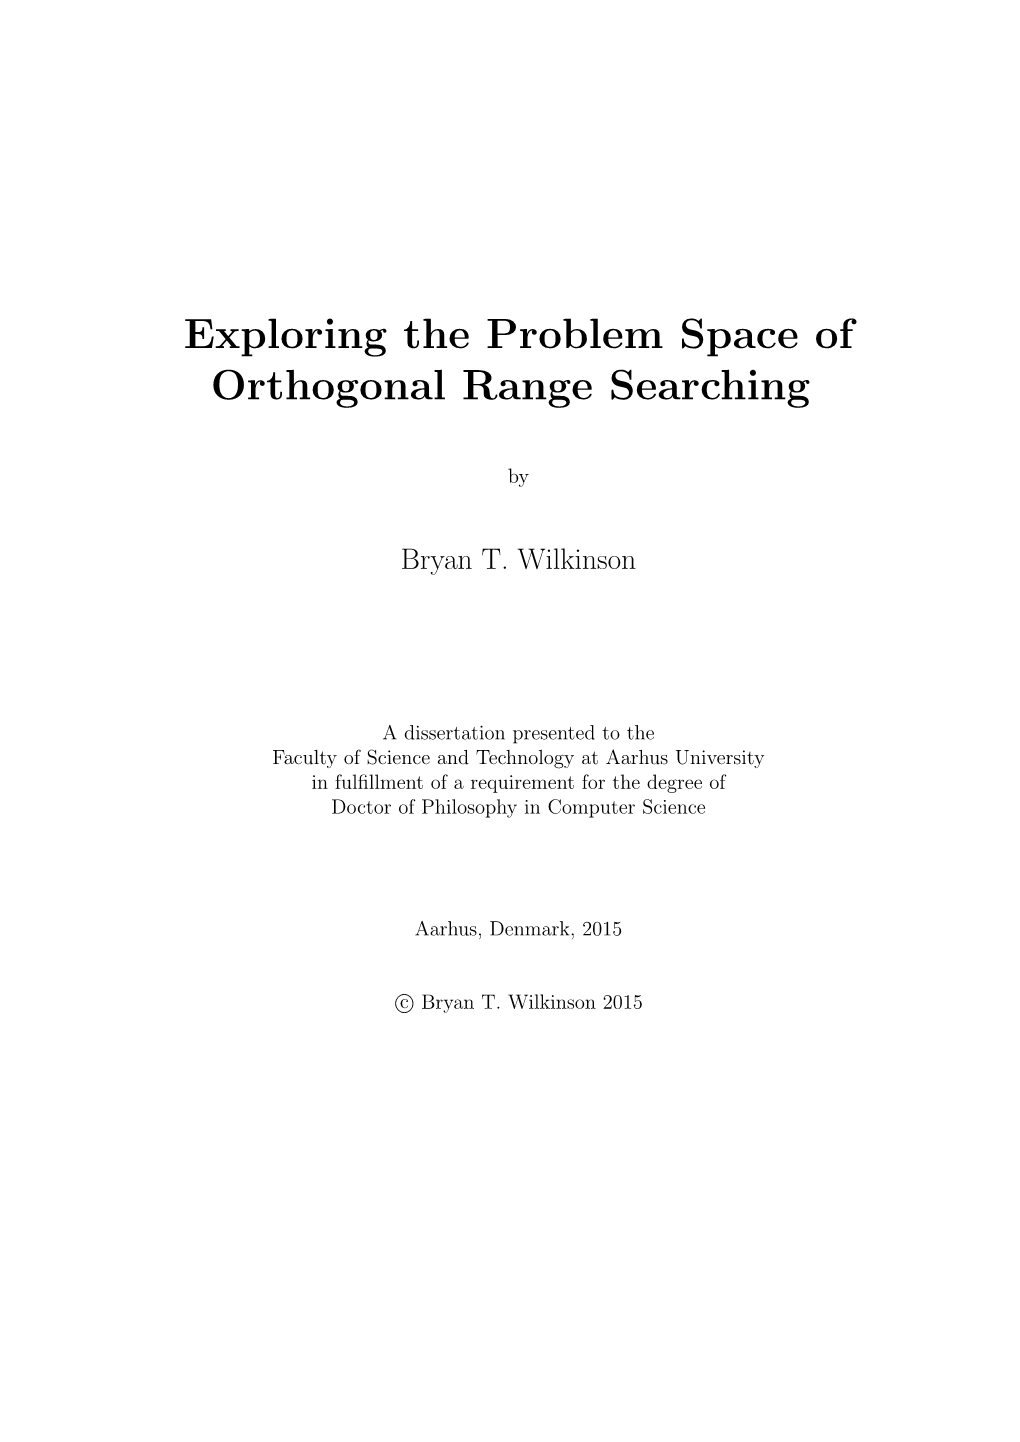 Exploring the Problem Space of Orthogonal Range Searching